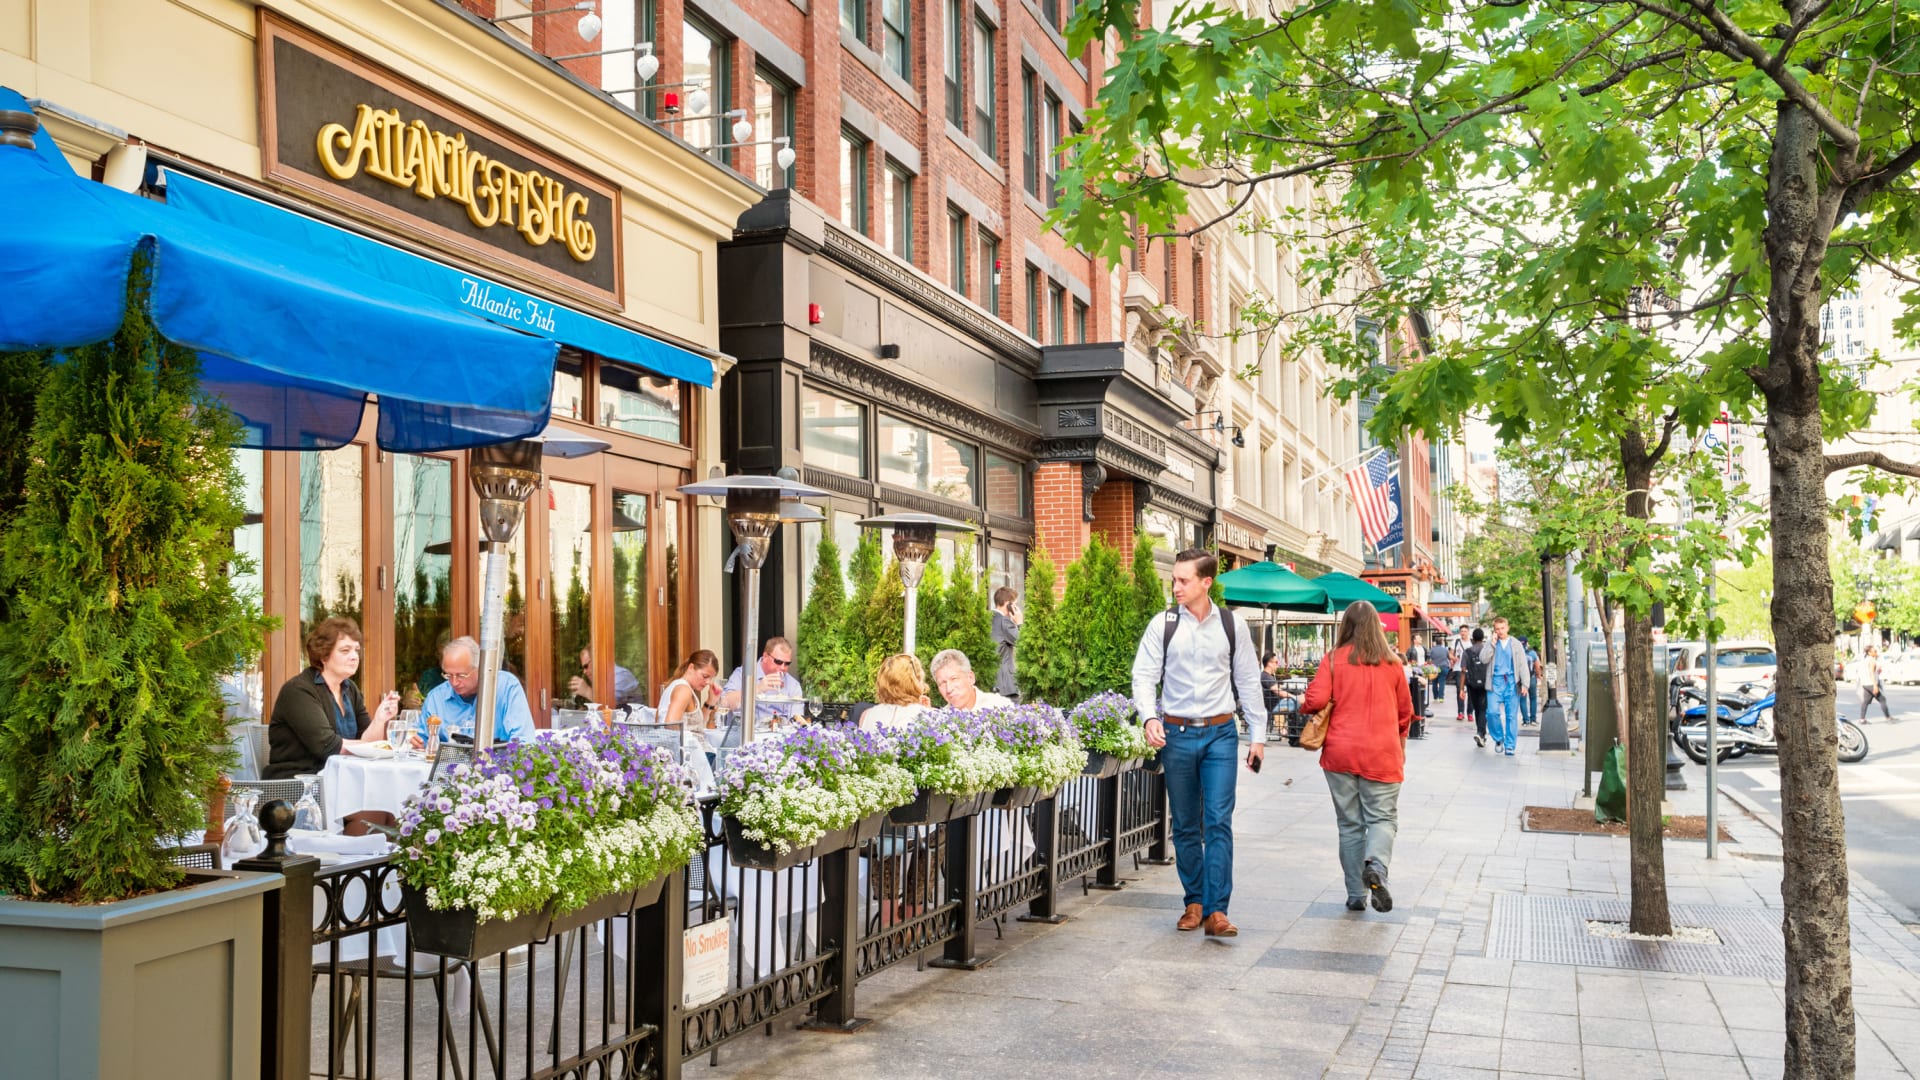 People dine at a restaurant patio in the Back Bay area of Boston.